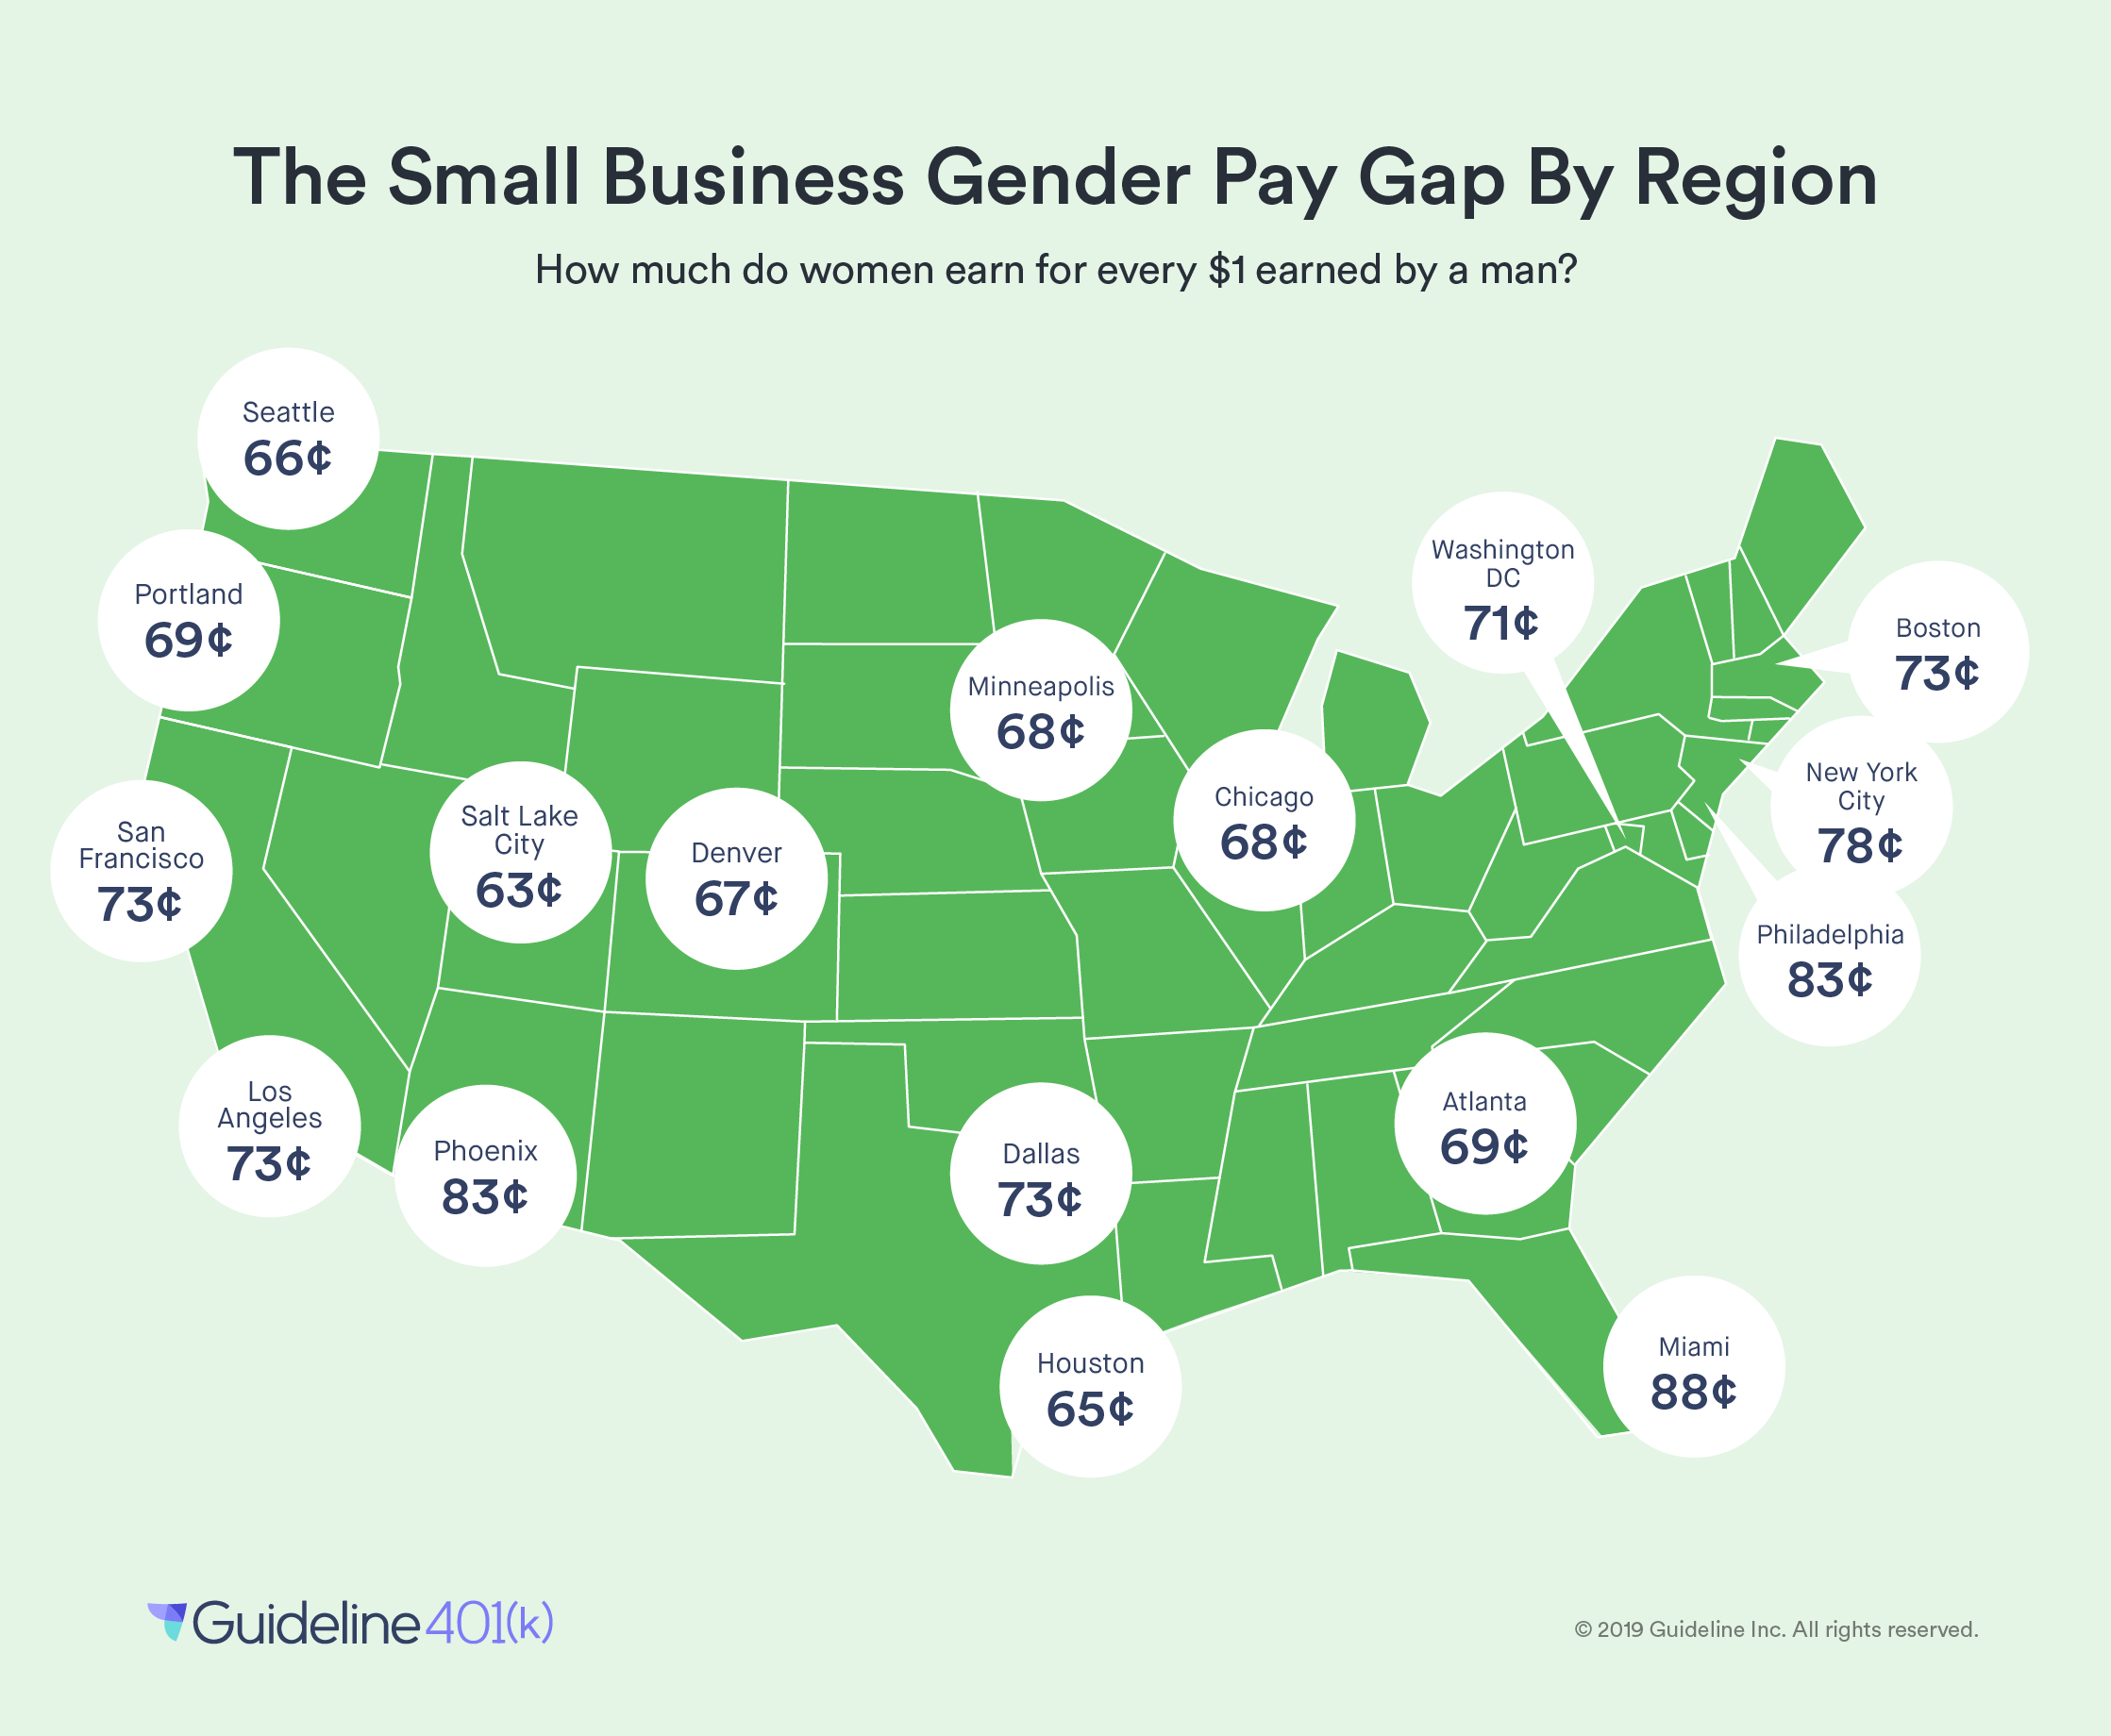 Small business gender pay gap by region